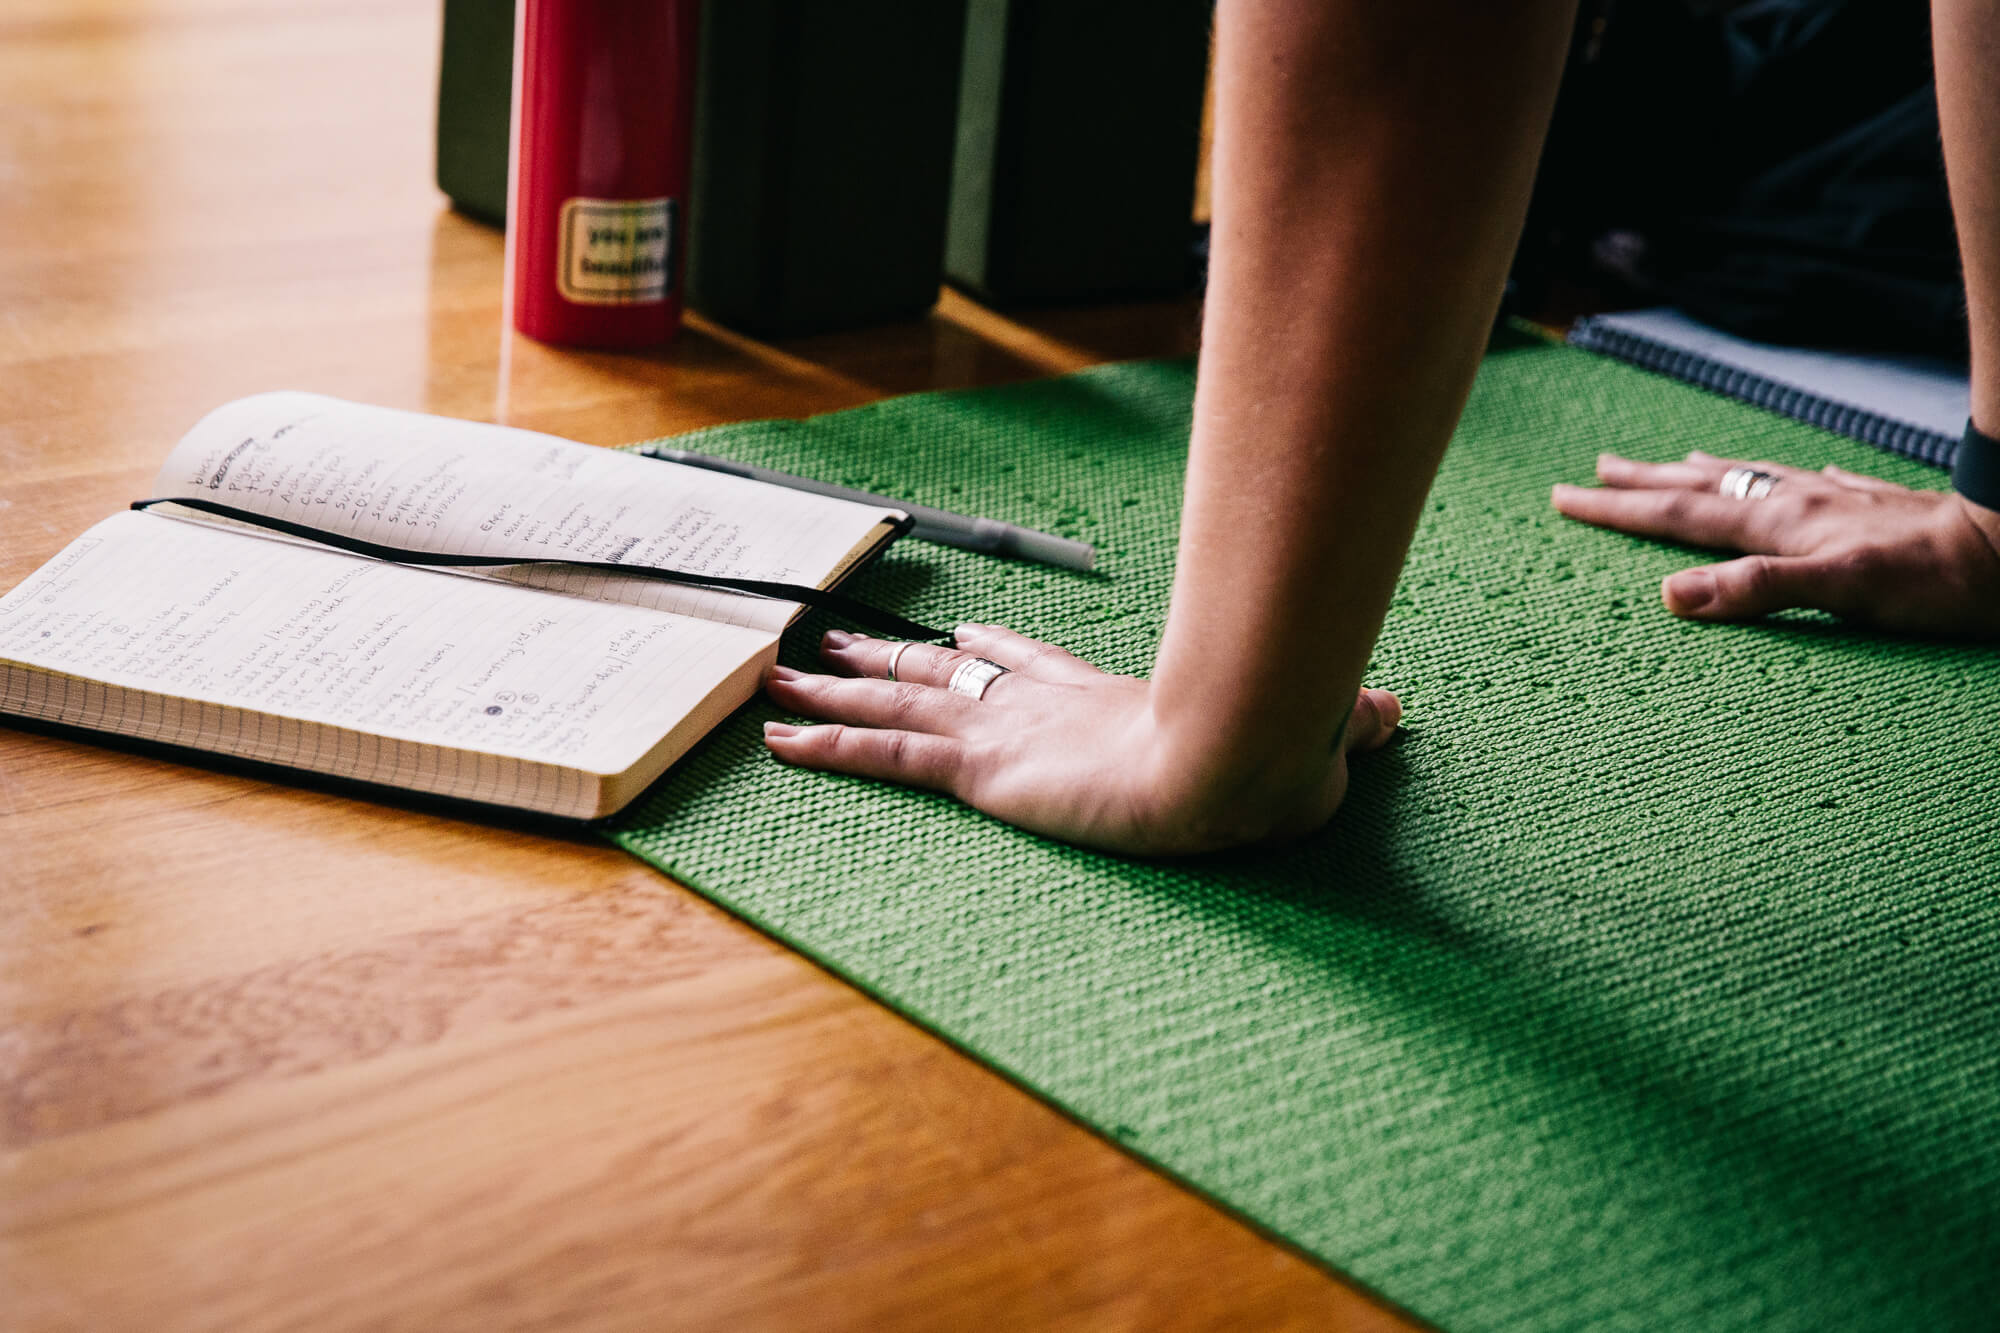 Yoga teacher demonstrates a pose on her mat: we just see her hands planted at the top of a green mat, with an open notebook and water bottle nearby.